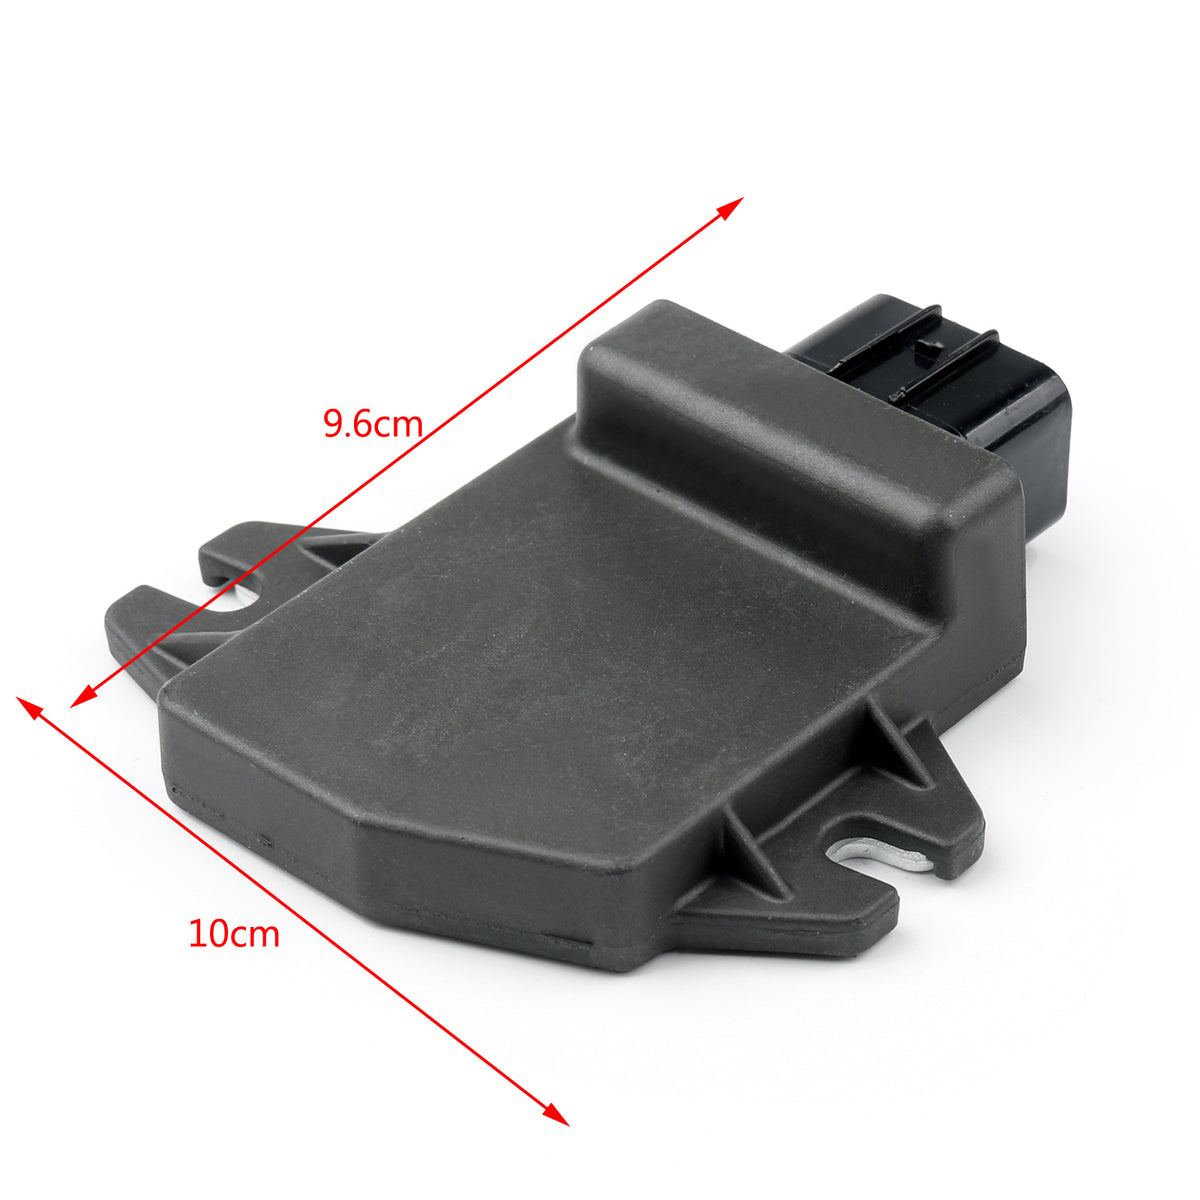 REGULATOR RECTIFIER FOR Lynx Xtrim 800R 2010 Rave 550 RS600 RE800 R 08-14 Generic